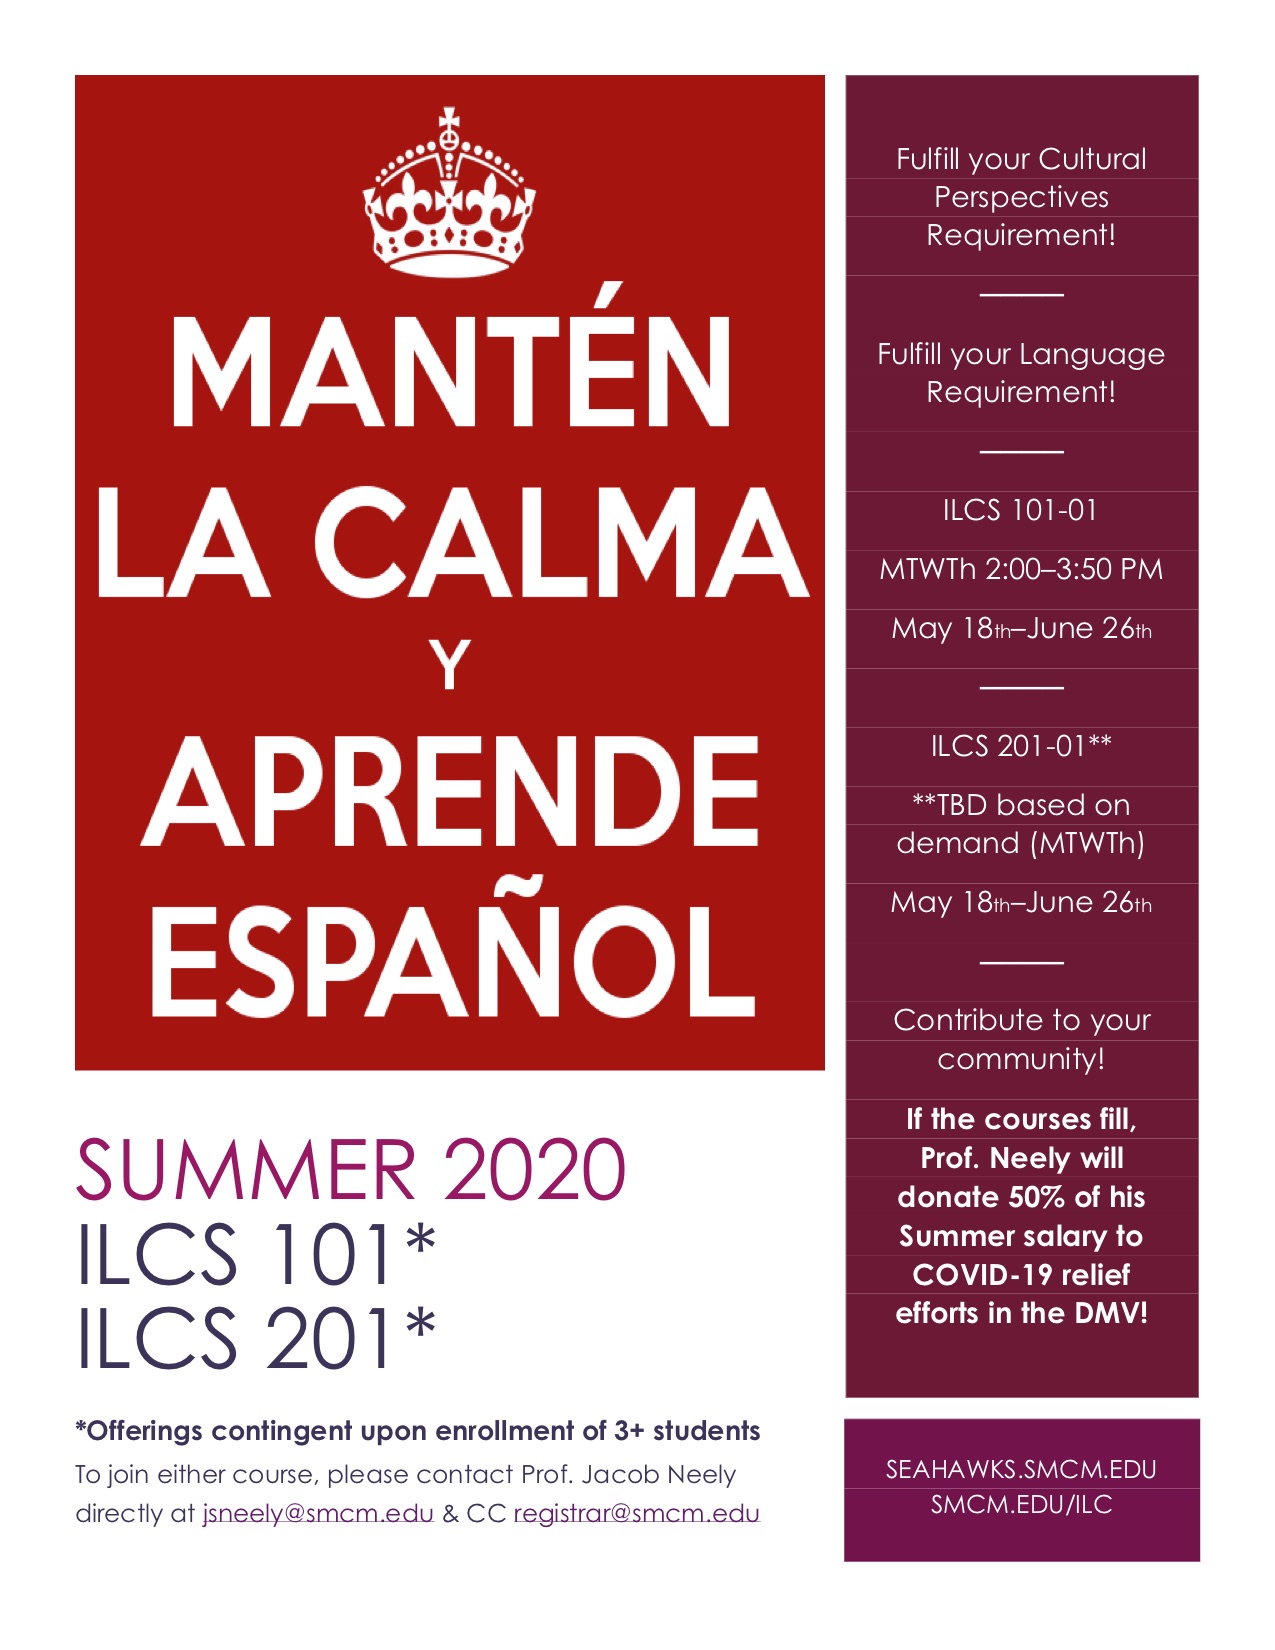 Summer 2020 Spanish (ILCS) 101 & 201 Offerings